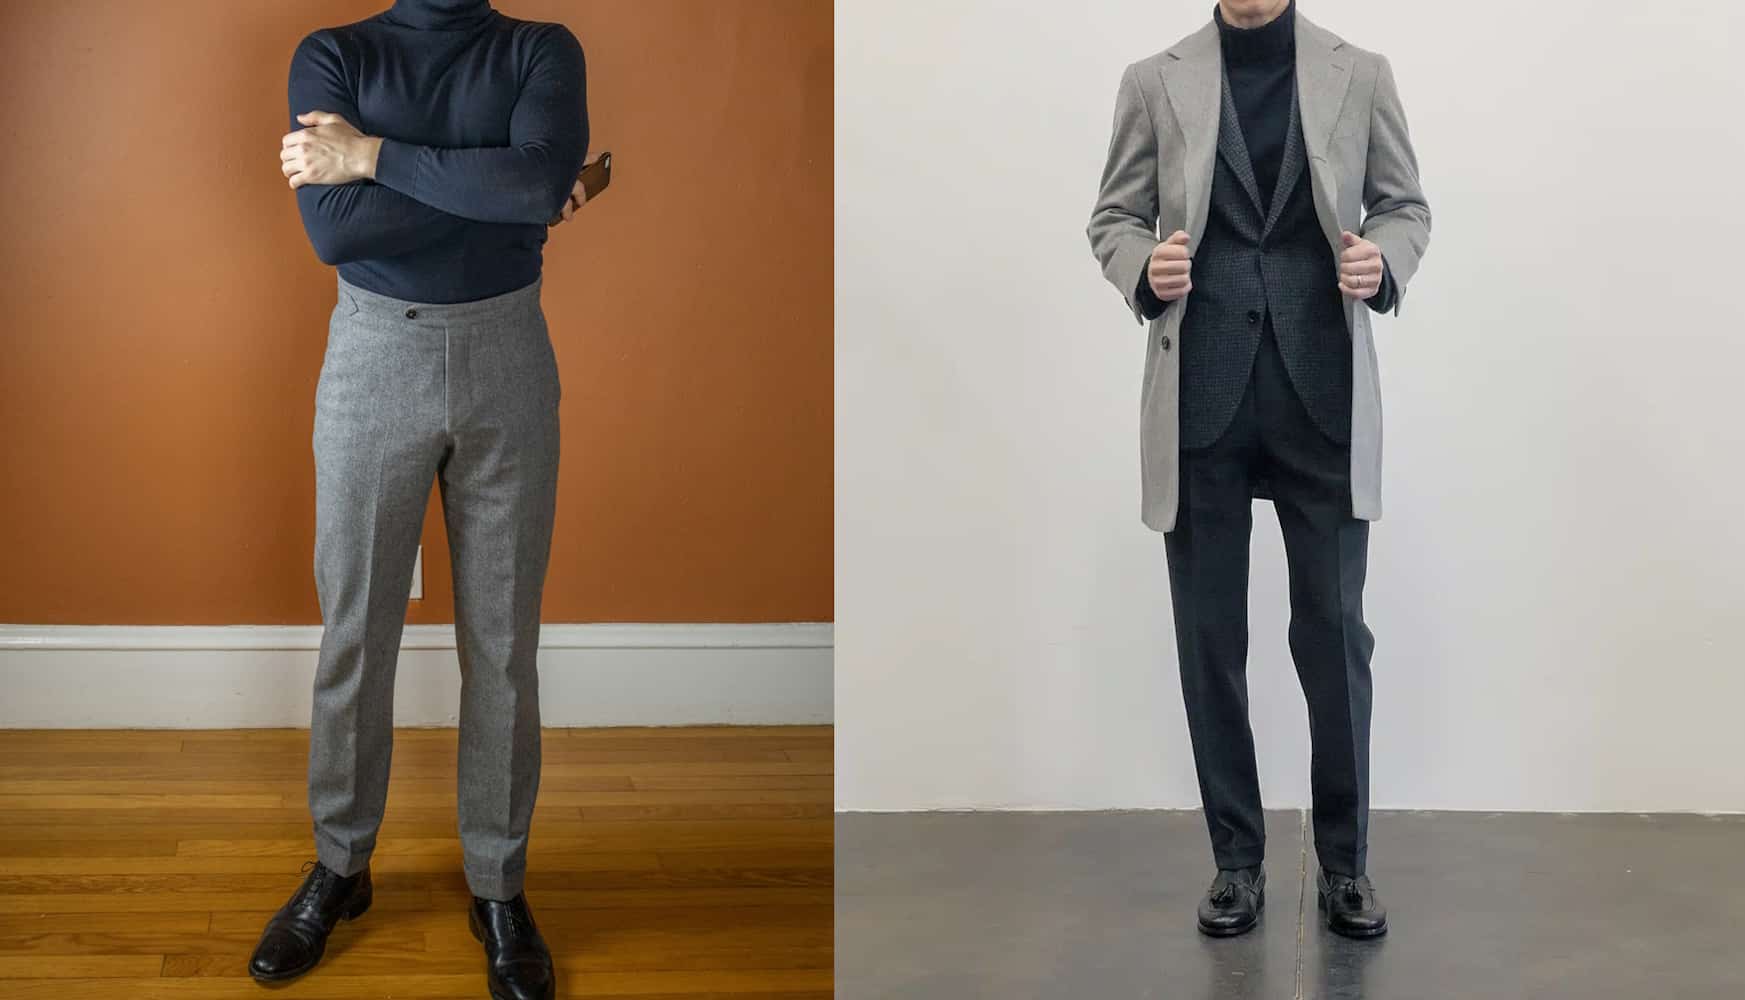 How to wear trousers in winter? 5 fashionable inspirations